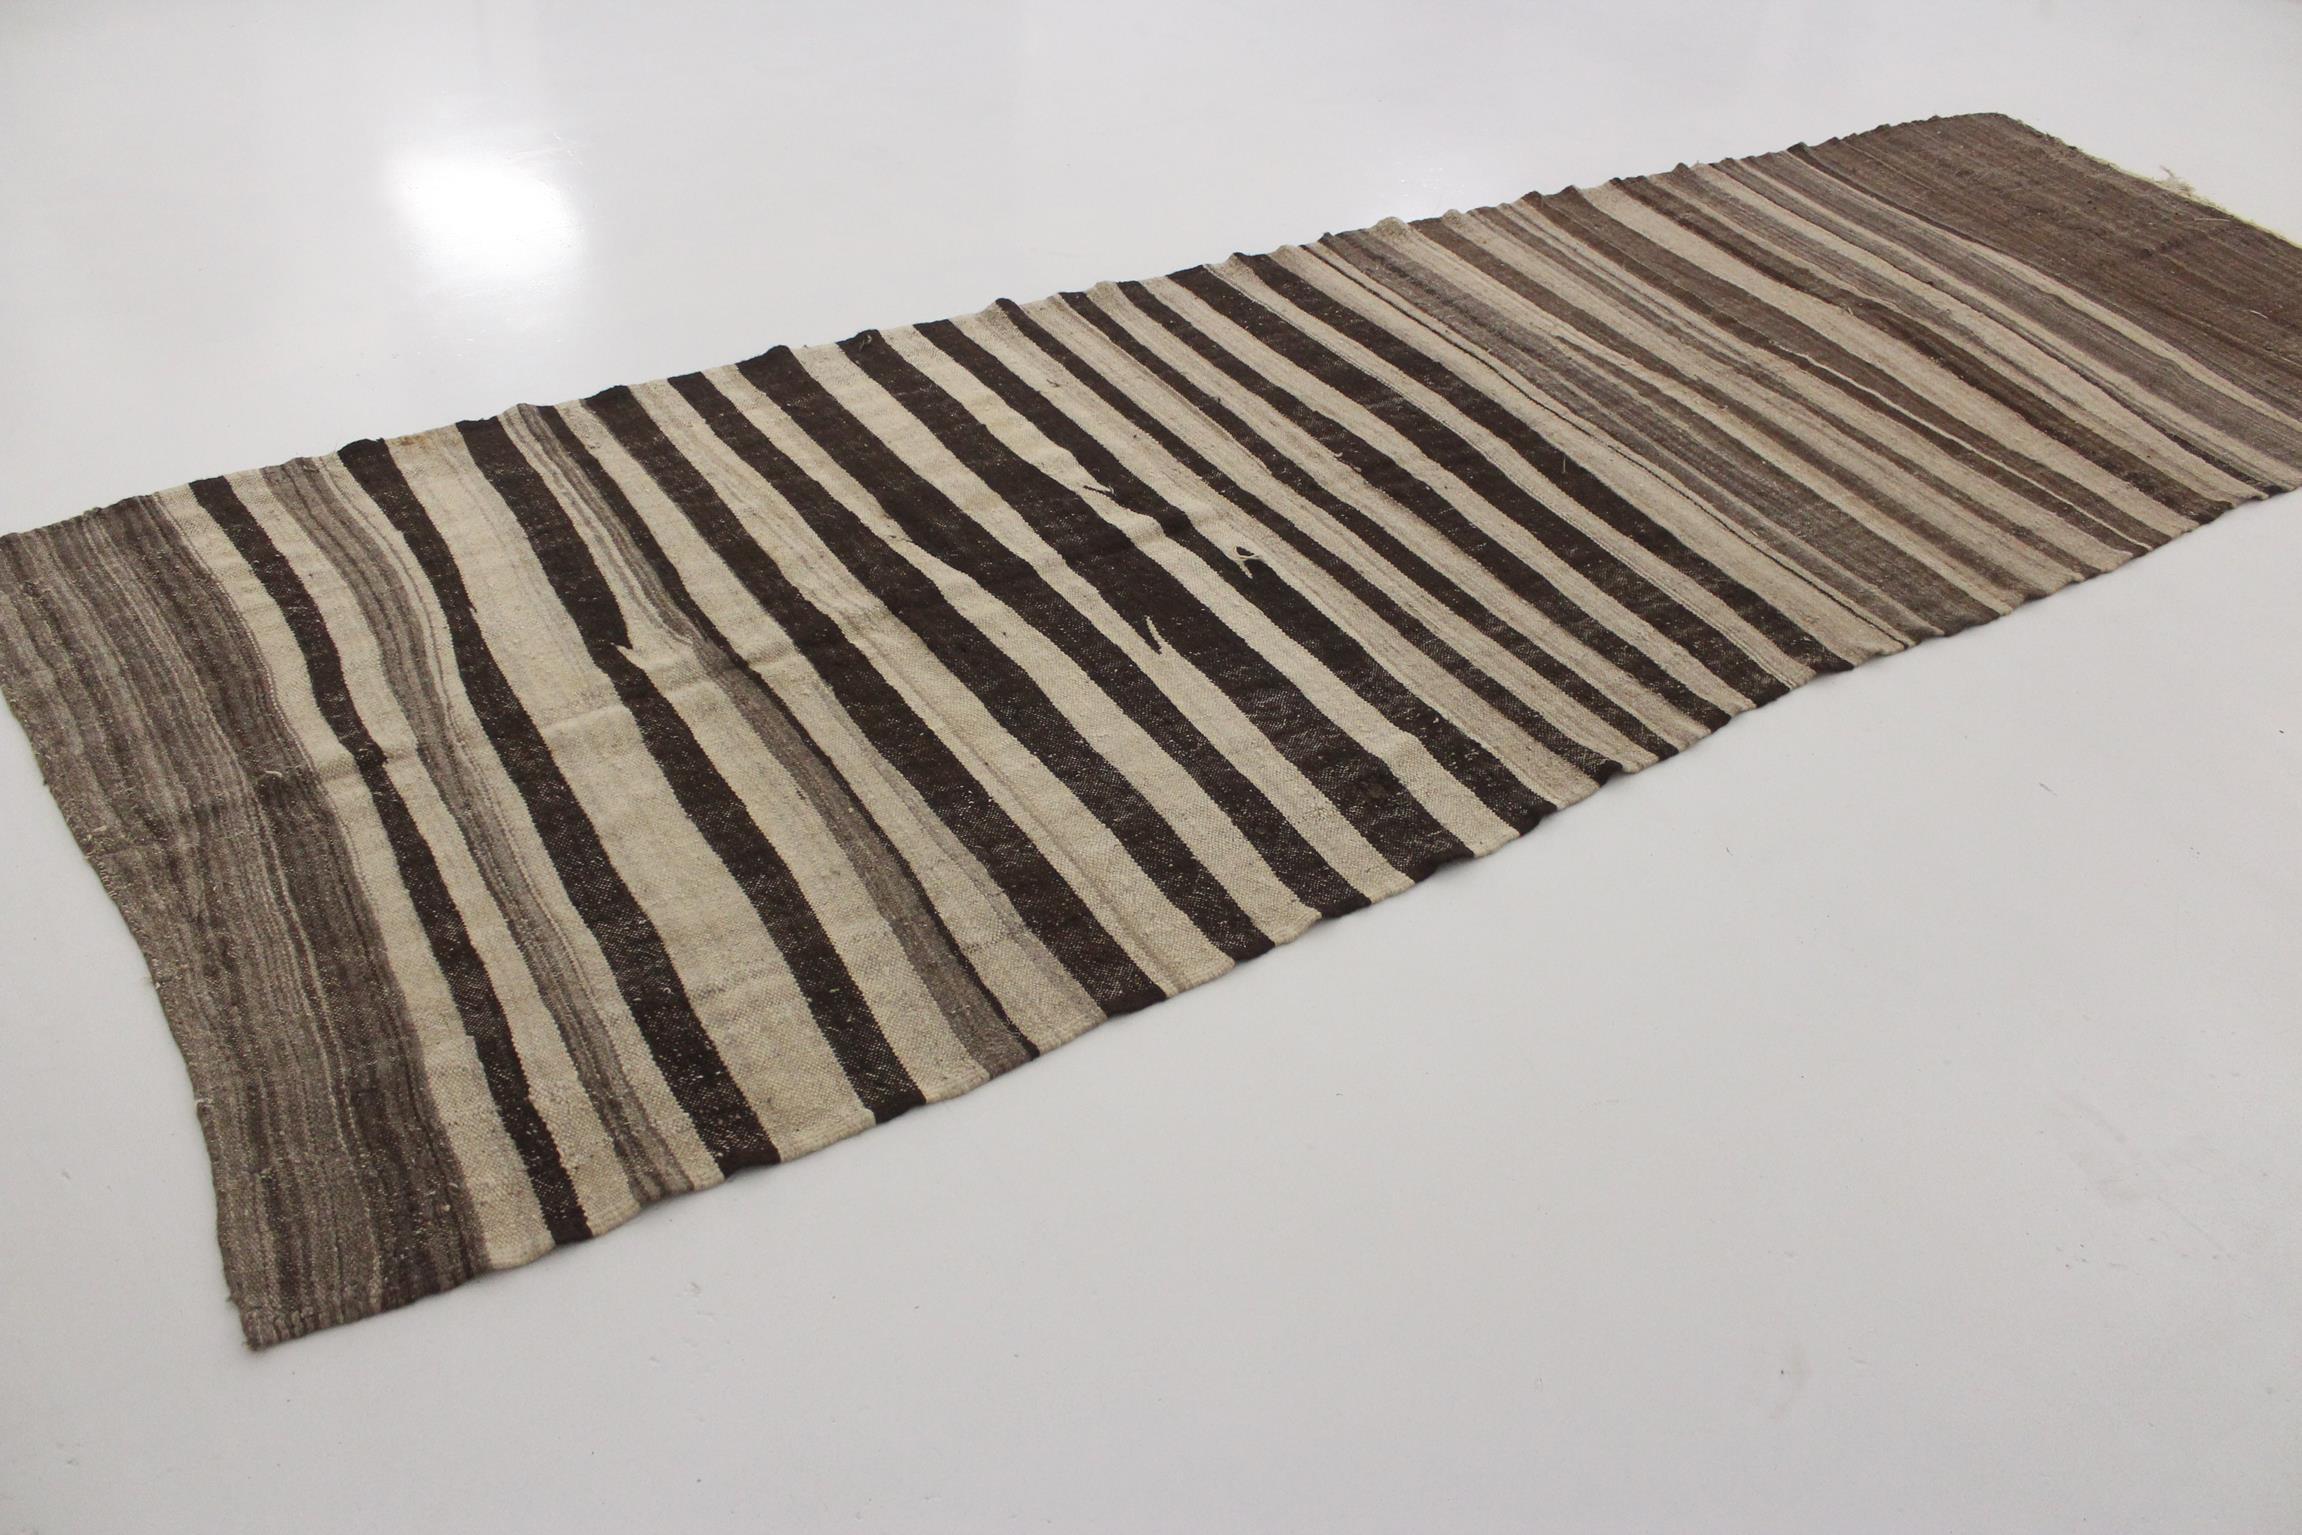 Vintage Moroccan Kilim rug - Stripes in beige+brown - 4.6x14.4feet / 142x440cm In Good Condition For Sale In Marrakech, MA